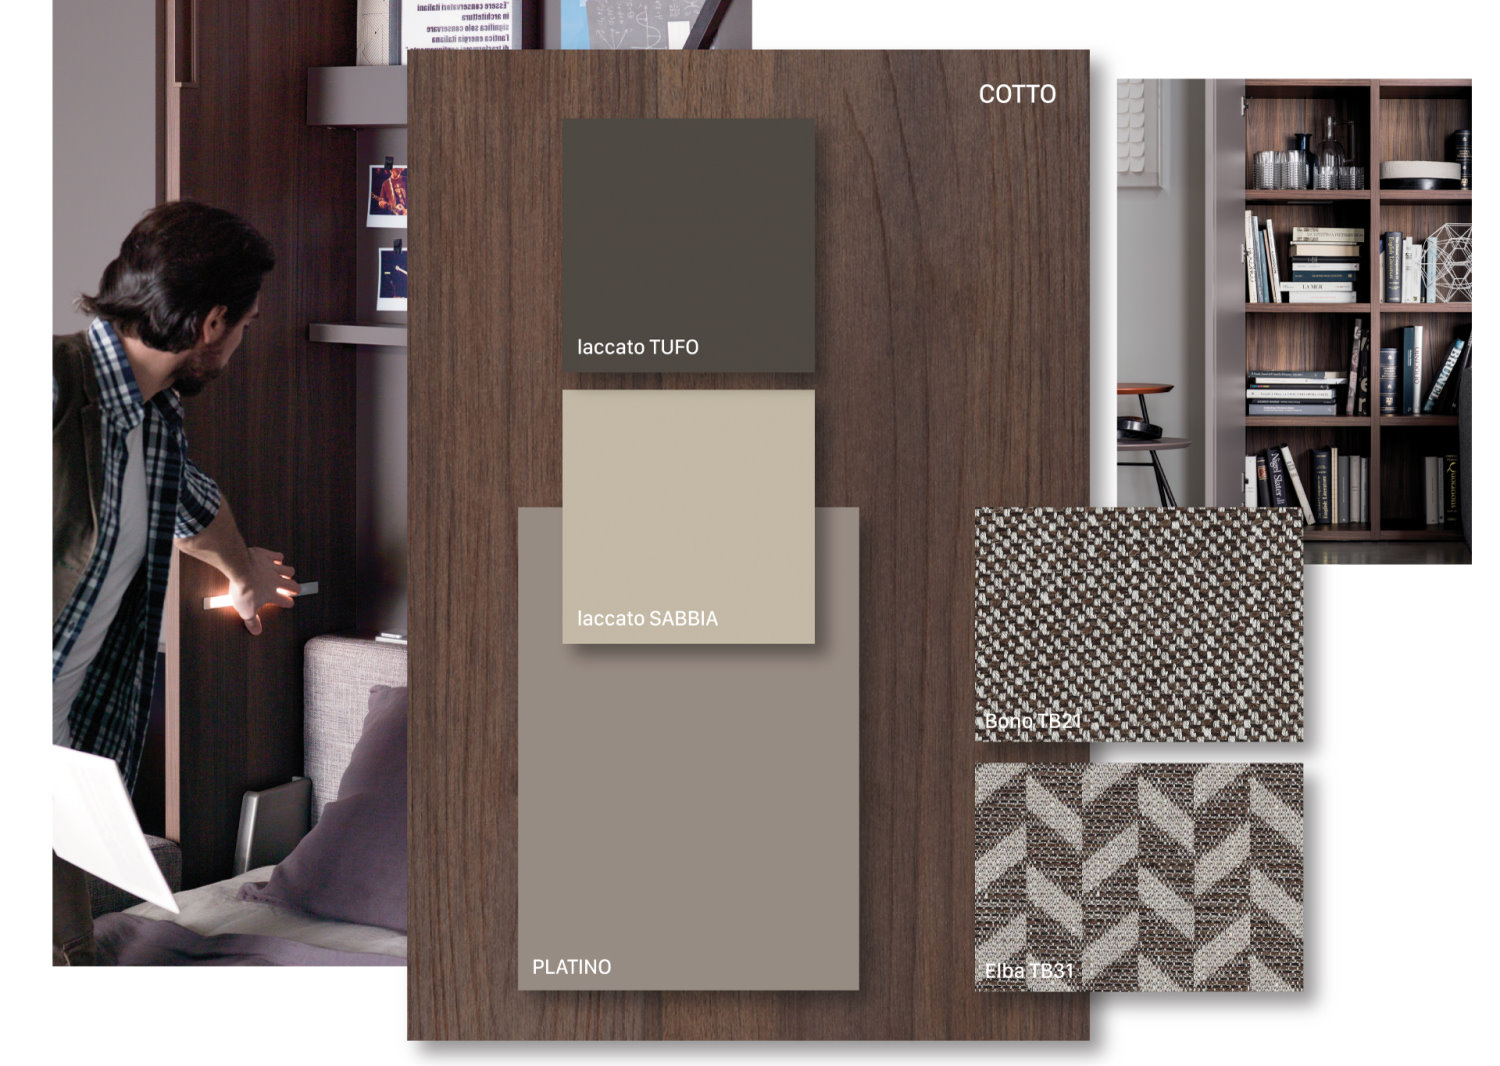 Confident moodboard: burnt and platinum melamines, tuff and sand lacquers, Bono and Elba fabrics